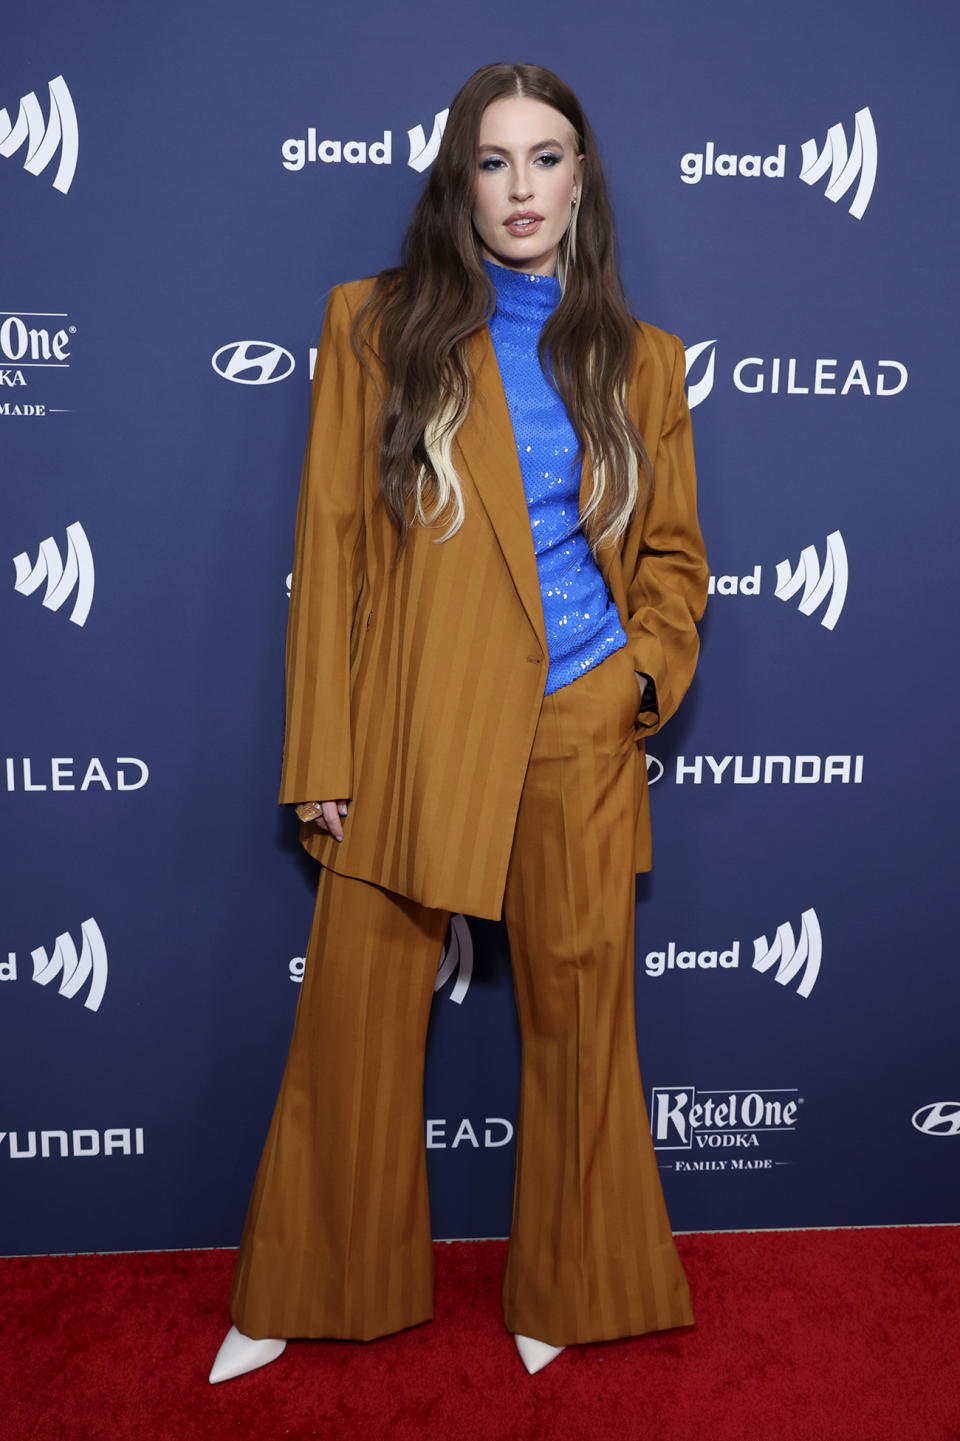 <p>BEVERLY HILLS, CALIFORNIA – MARCH 30: FLETCHER attends the GLAAD Media Awards at The Beverly Hilton on March 30, 2023 in Beverly Hills, California. (Photo by Randy Shropshire/Getty Images for GLAAD)</p>